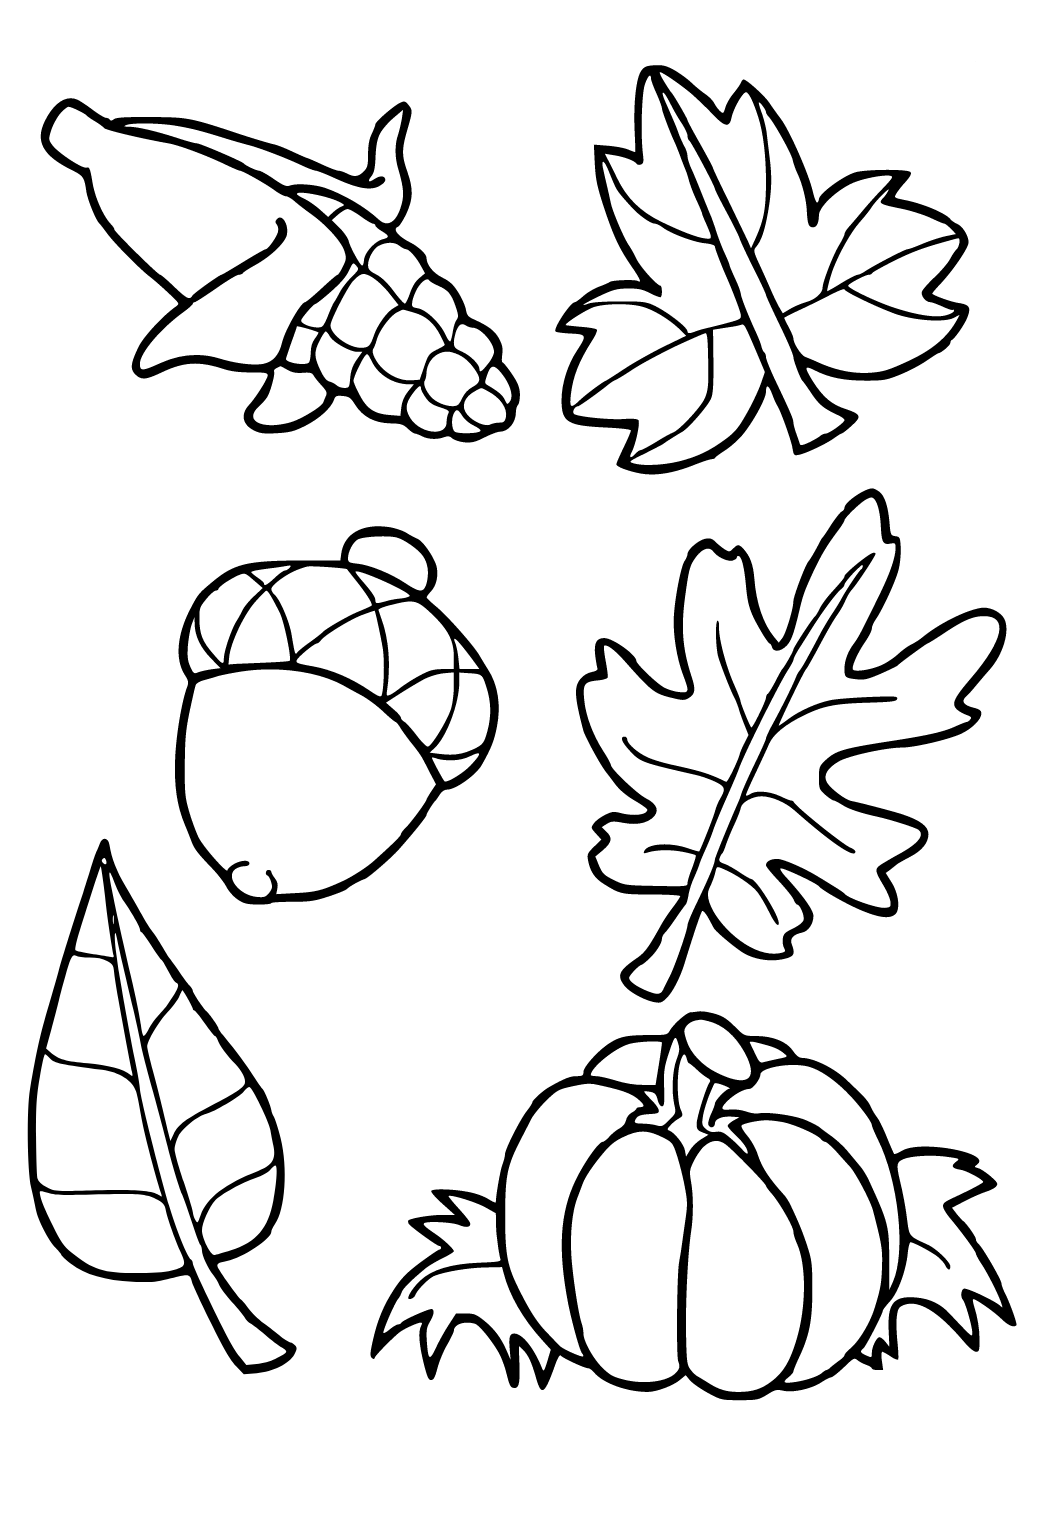 Free printable autumn fall harvest coloring page for adults and kids